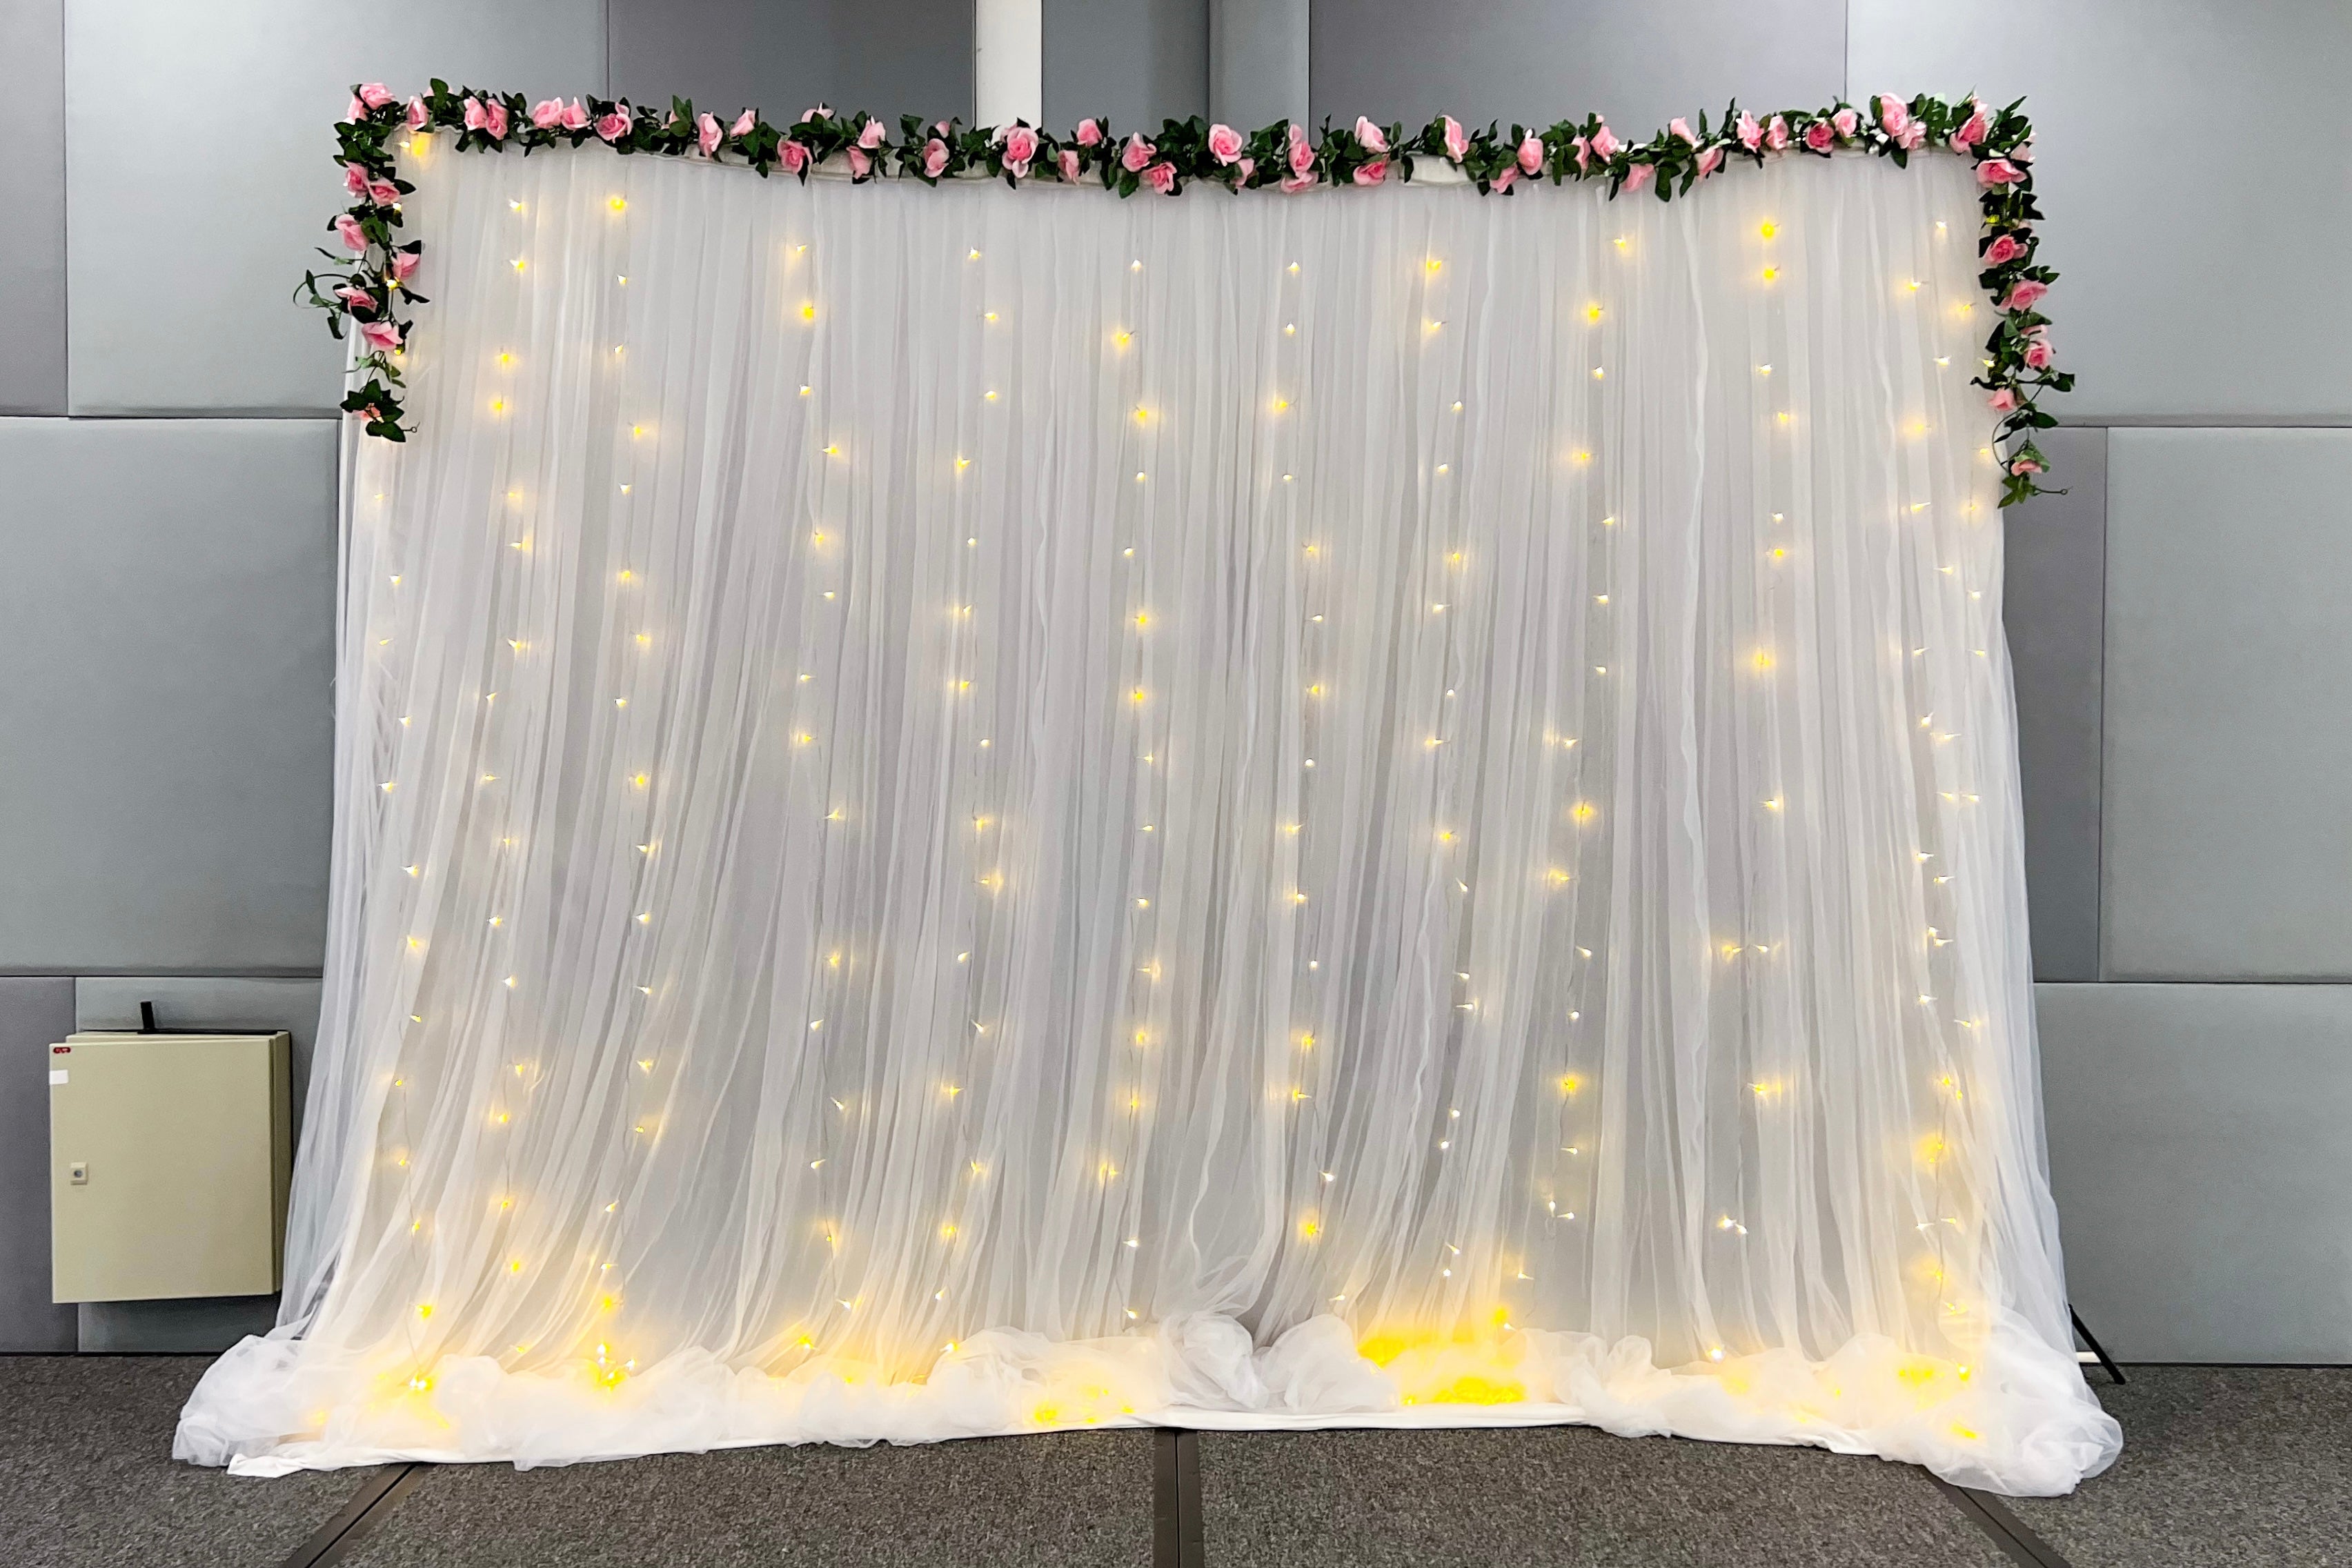 Pink Tulle Curtain Backdrop